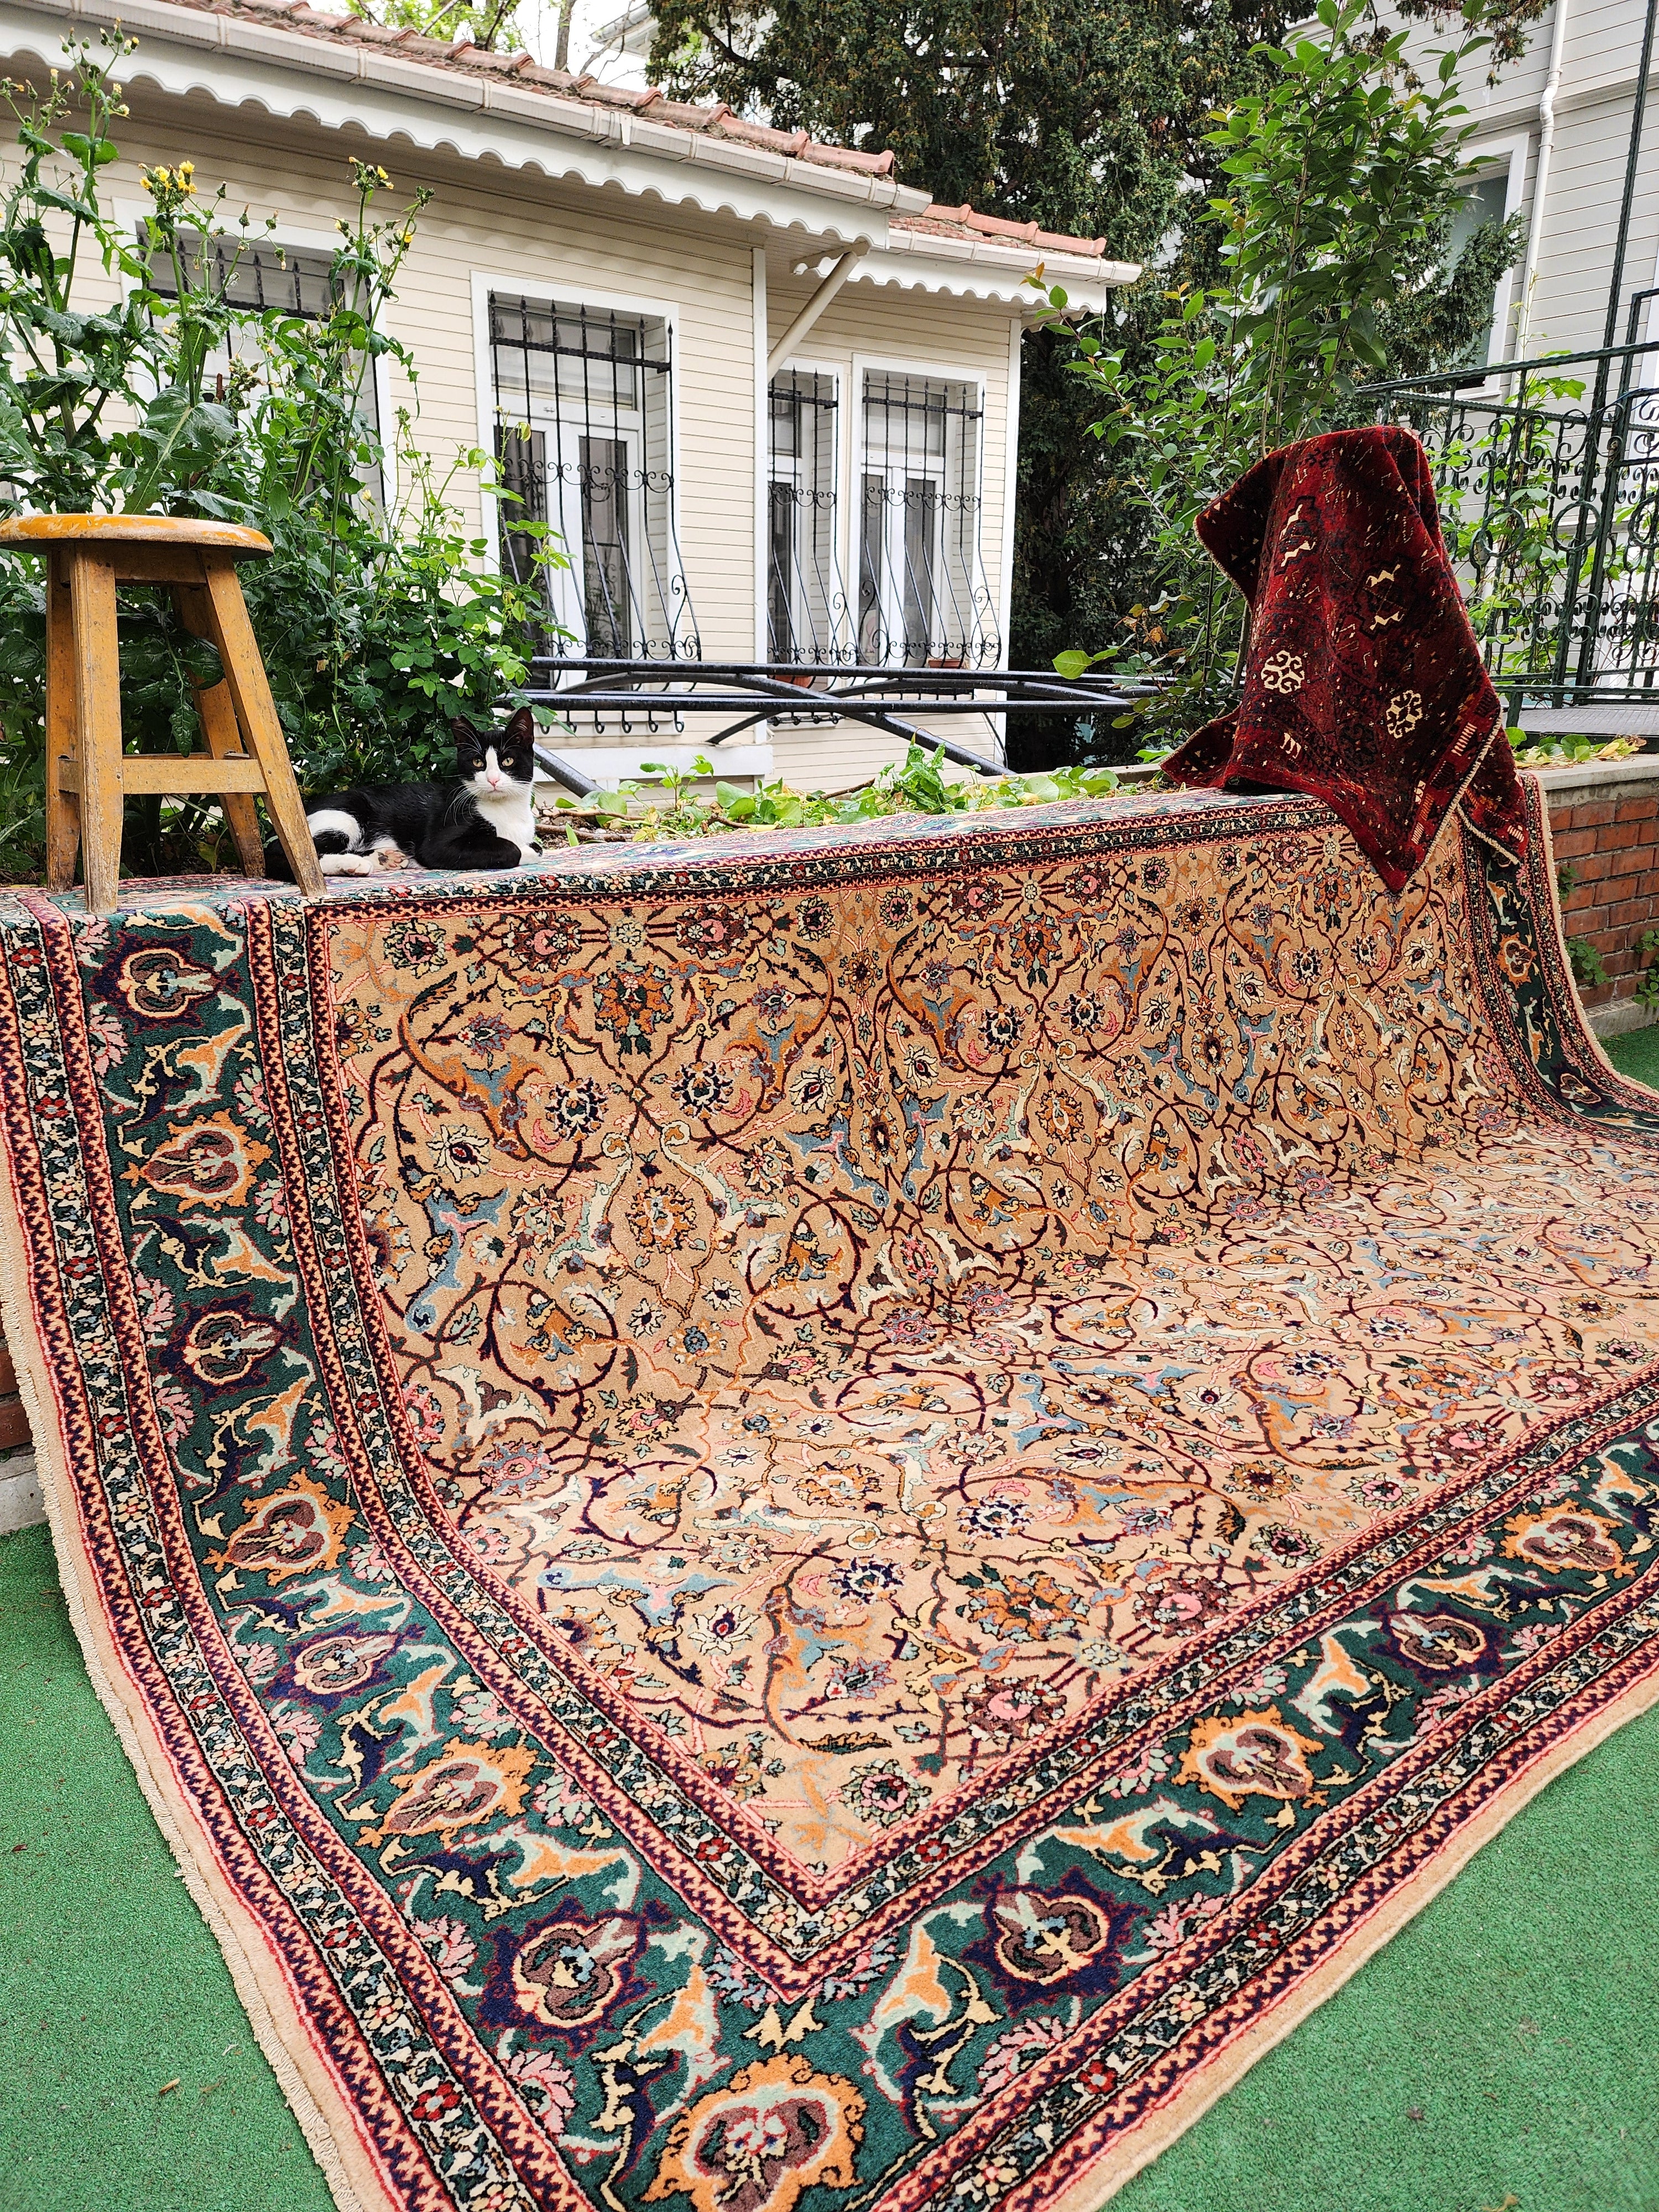 Antique Large Hereke Rug, 9 ft 10 in x 6 ft 4 in, Soft Pink and Green Late Ottoman Period Floral Rug